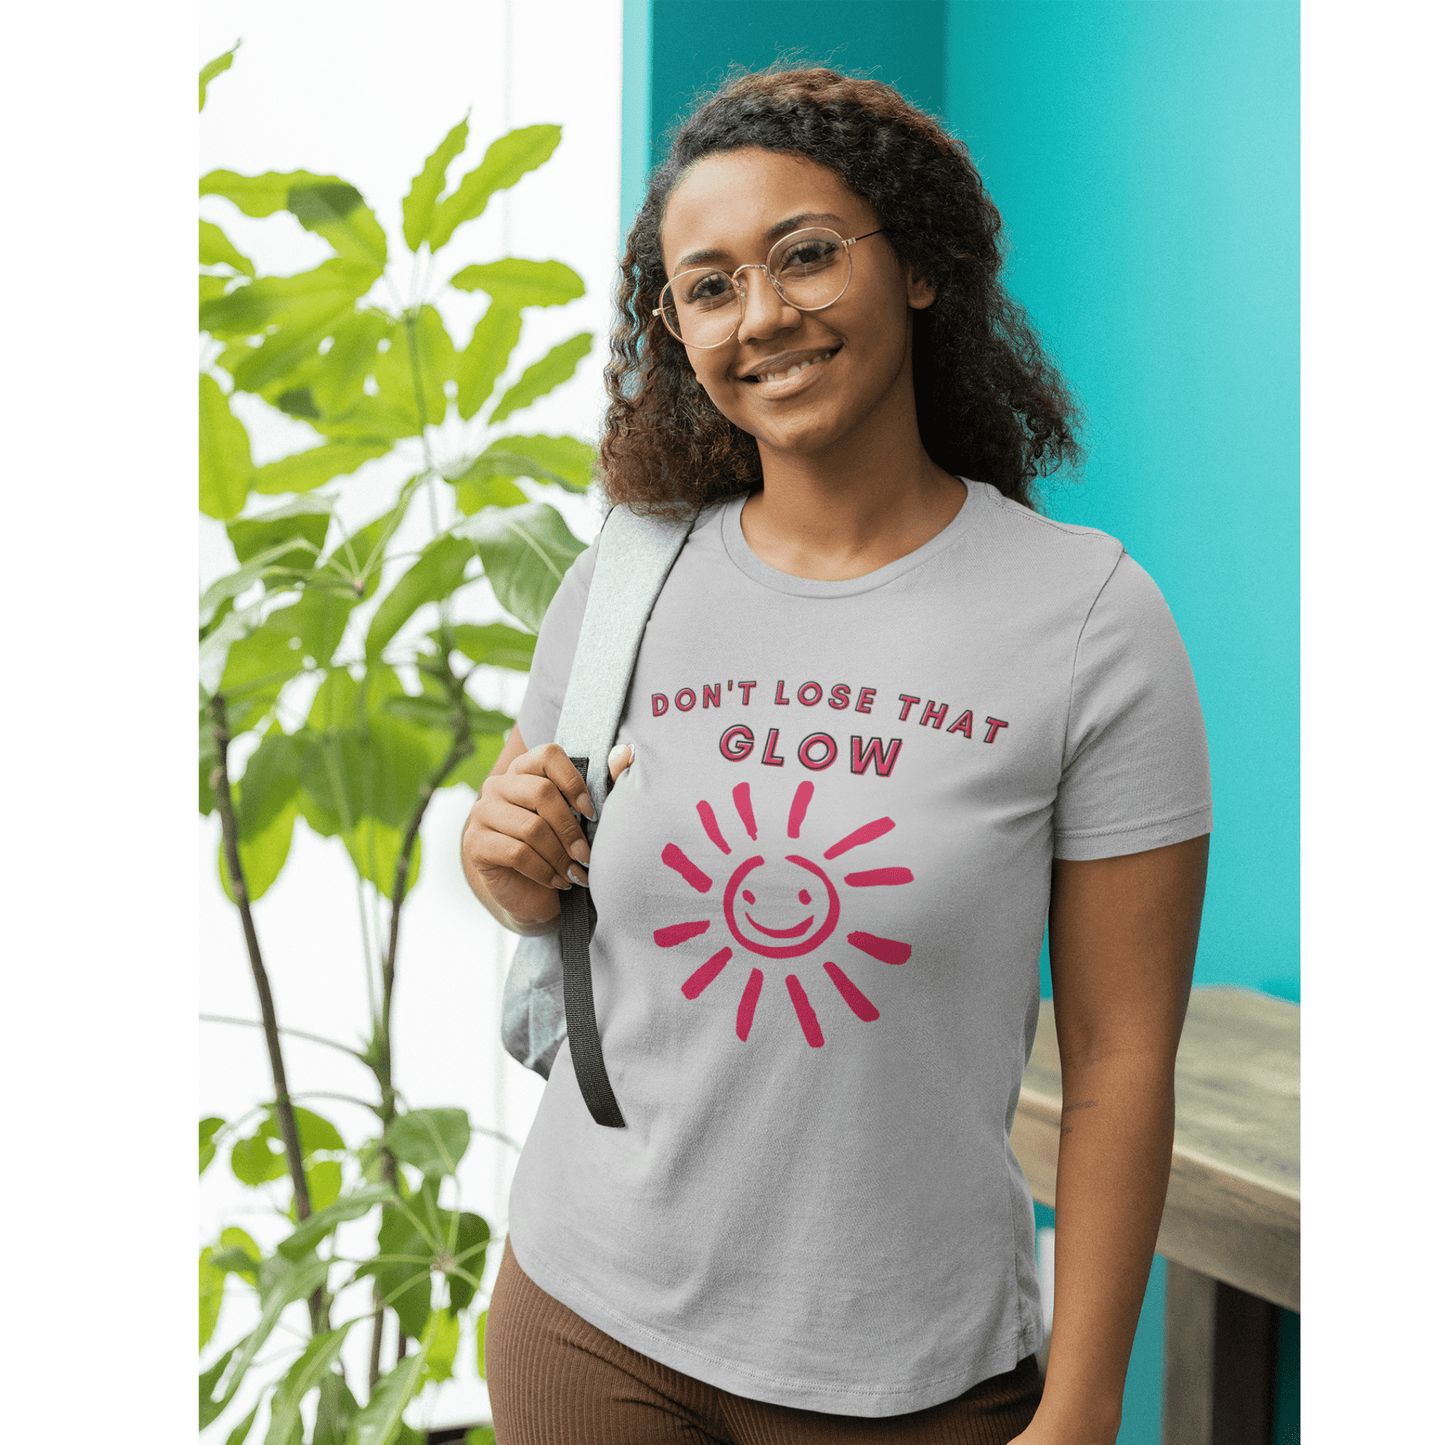 Don't Lose that Glow(Graphic Fuchsia Text with Smiling Sun) Unisex Jersey Short Sleeve Tee - Style: Bella+Canvas 3001